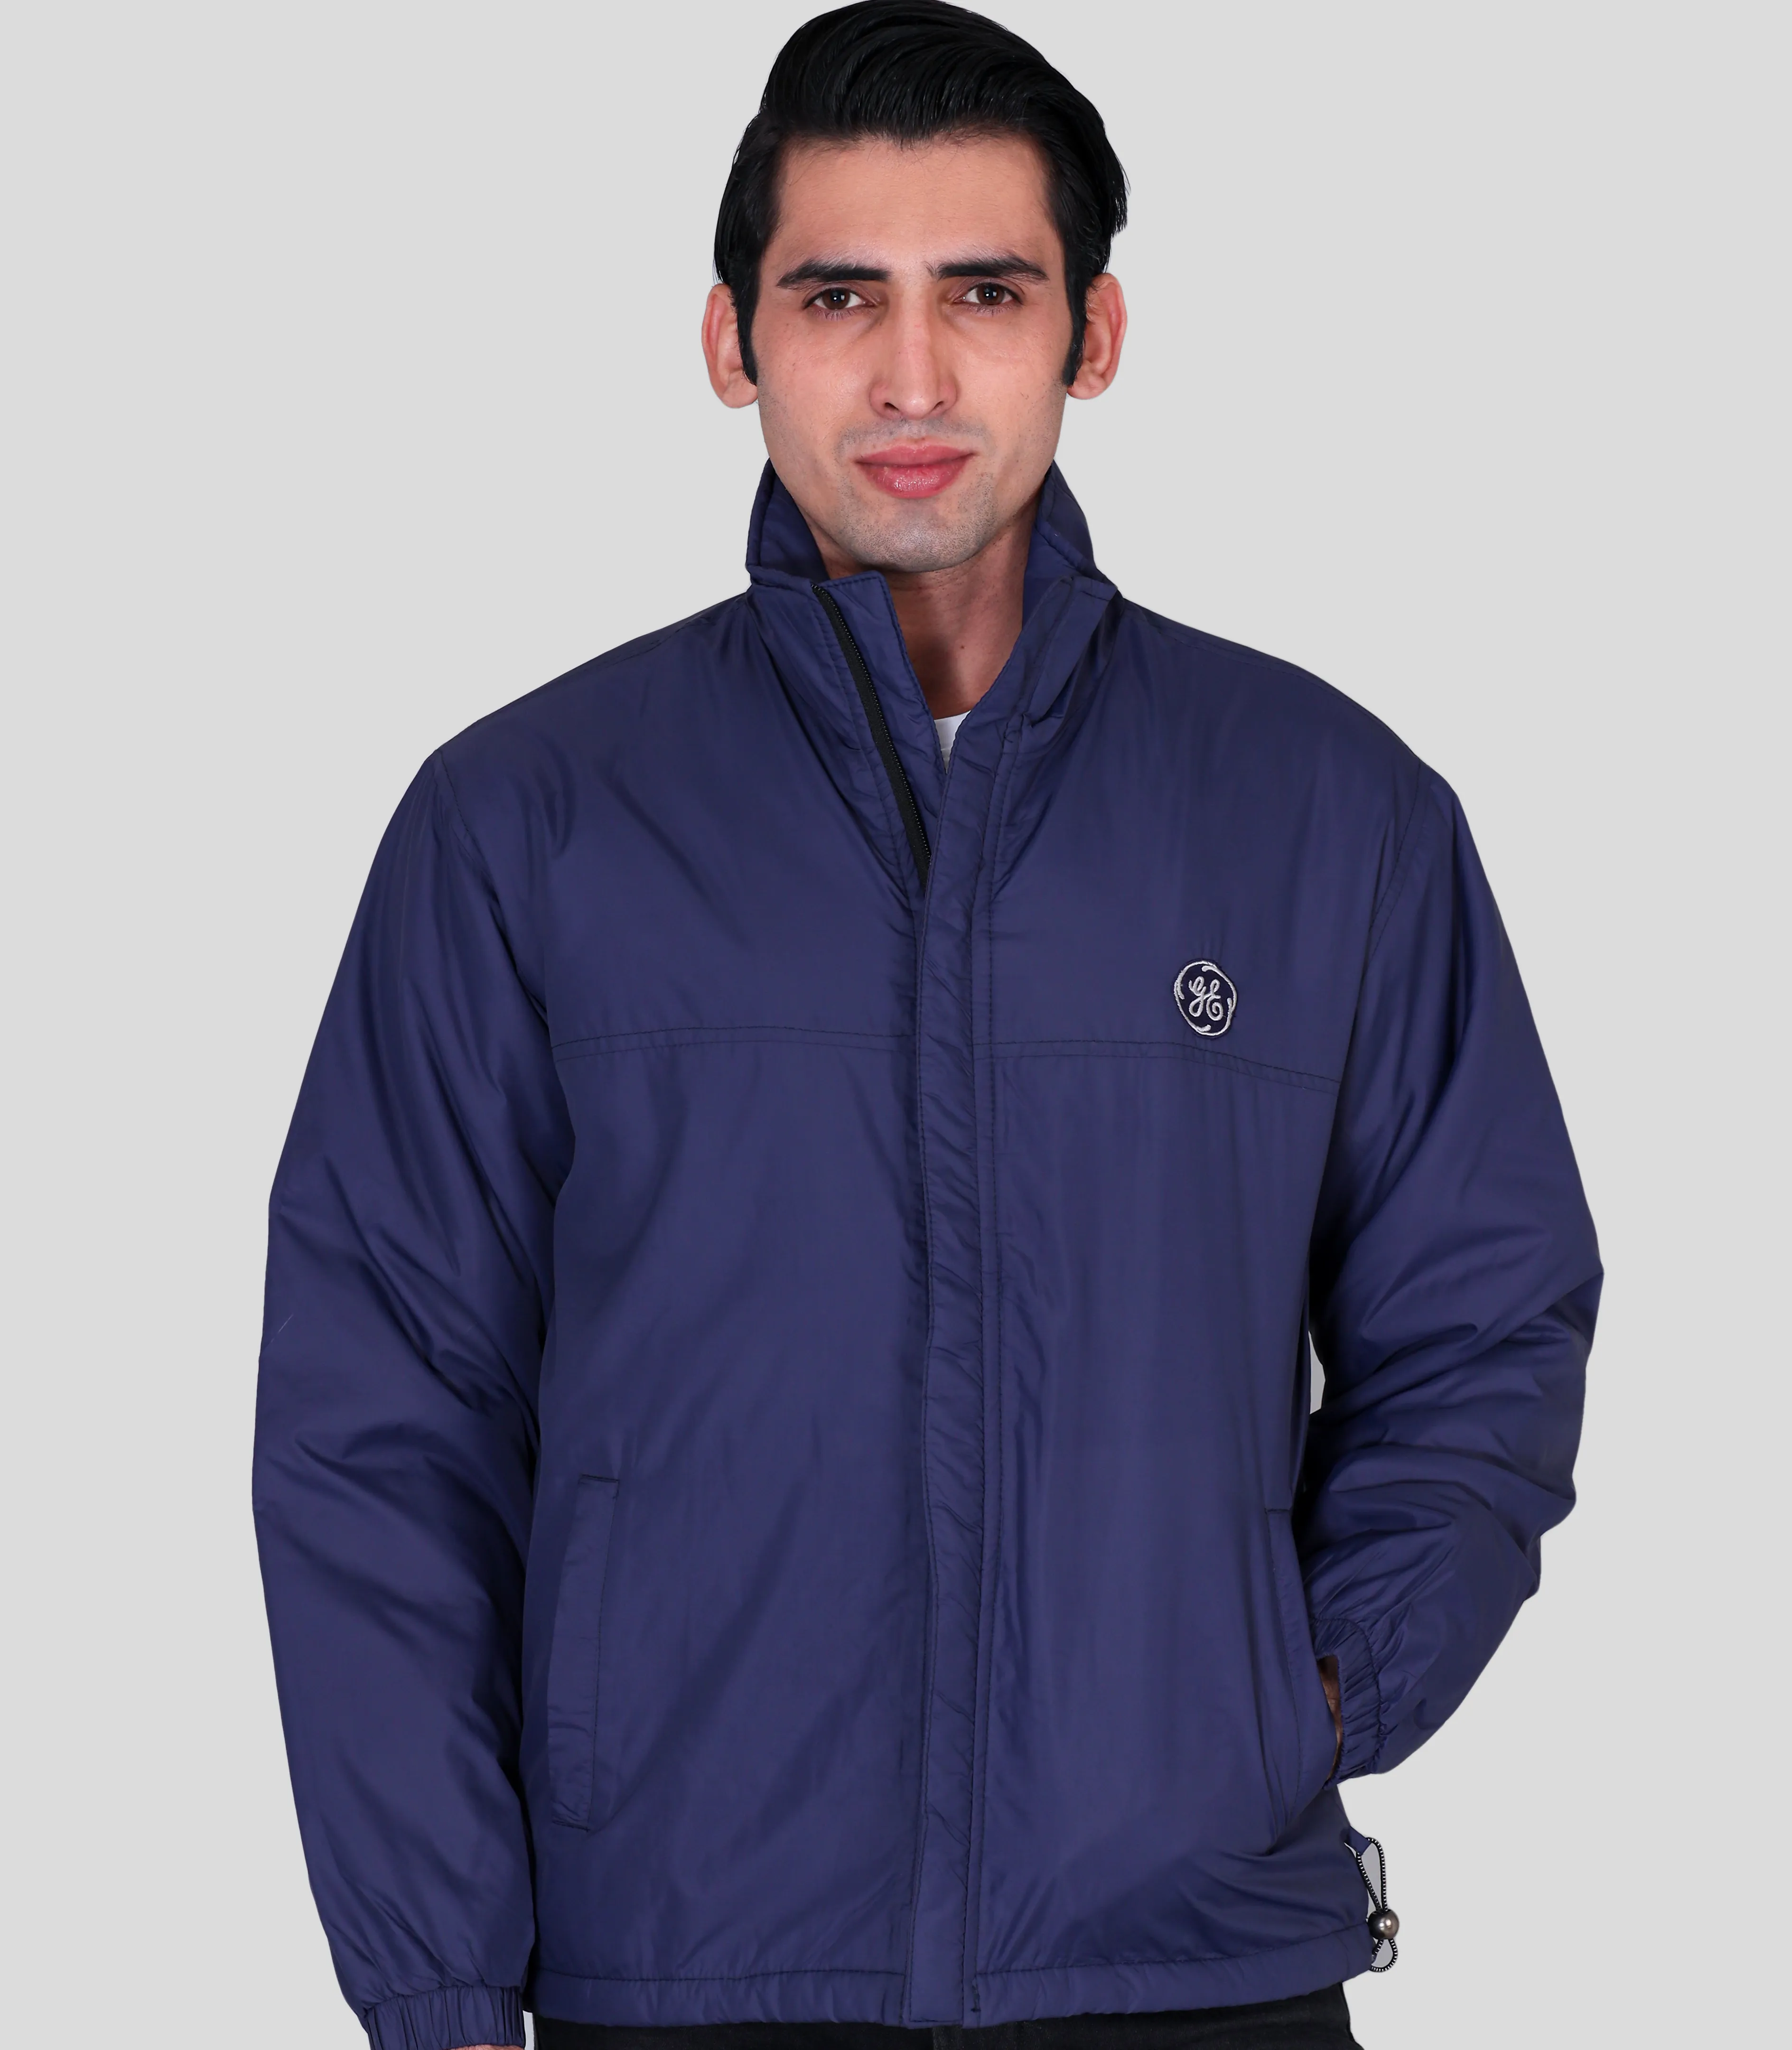 Personalized jackets manufacturer in delhi